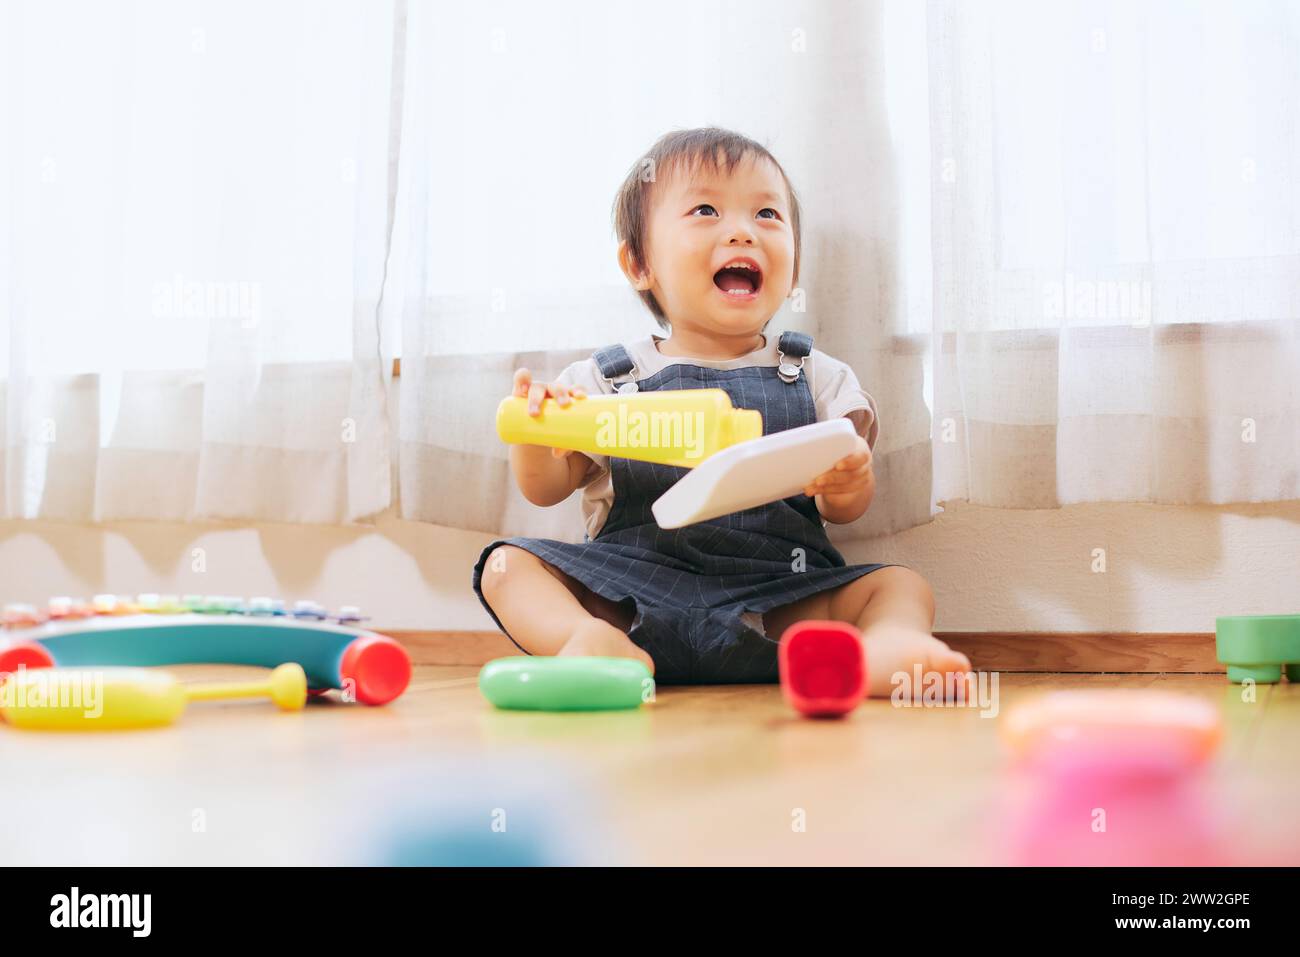 A baby playing with toys on the floor Stock Photo